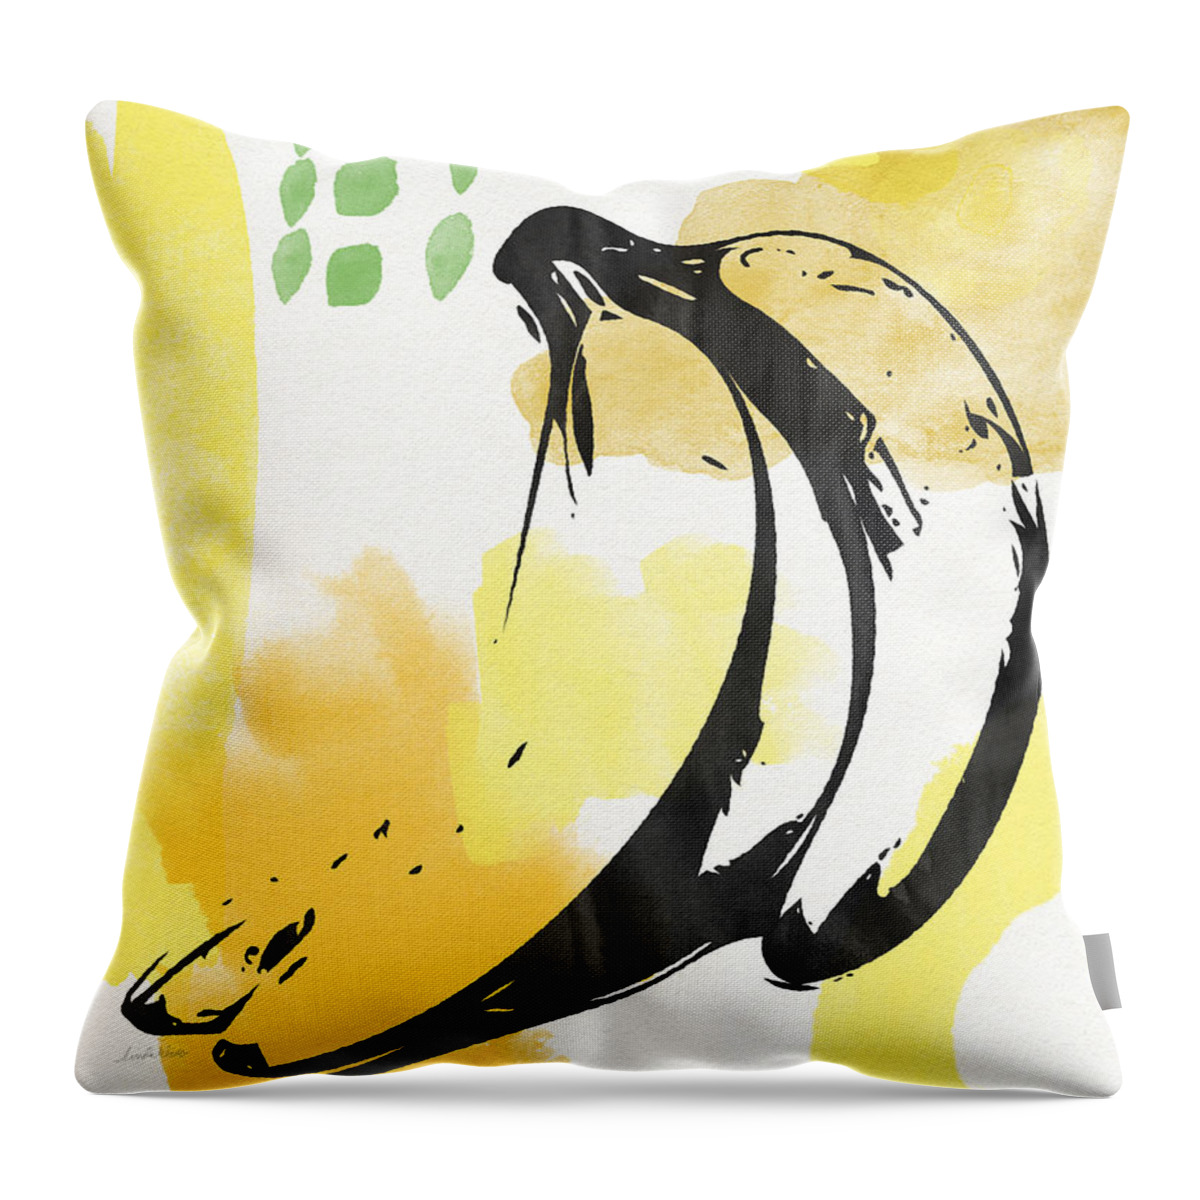 Bananas Throw Pillow featuring the painting Bananas- Art by Linda Woods by Linda Woods